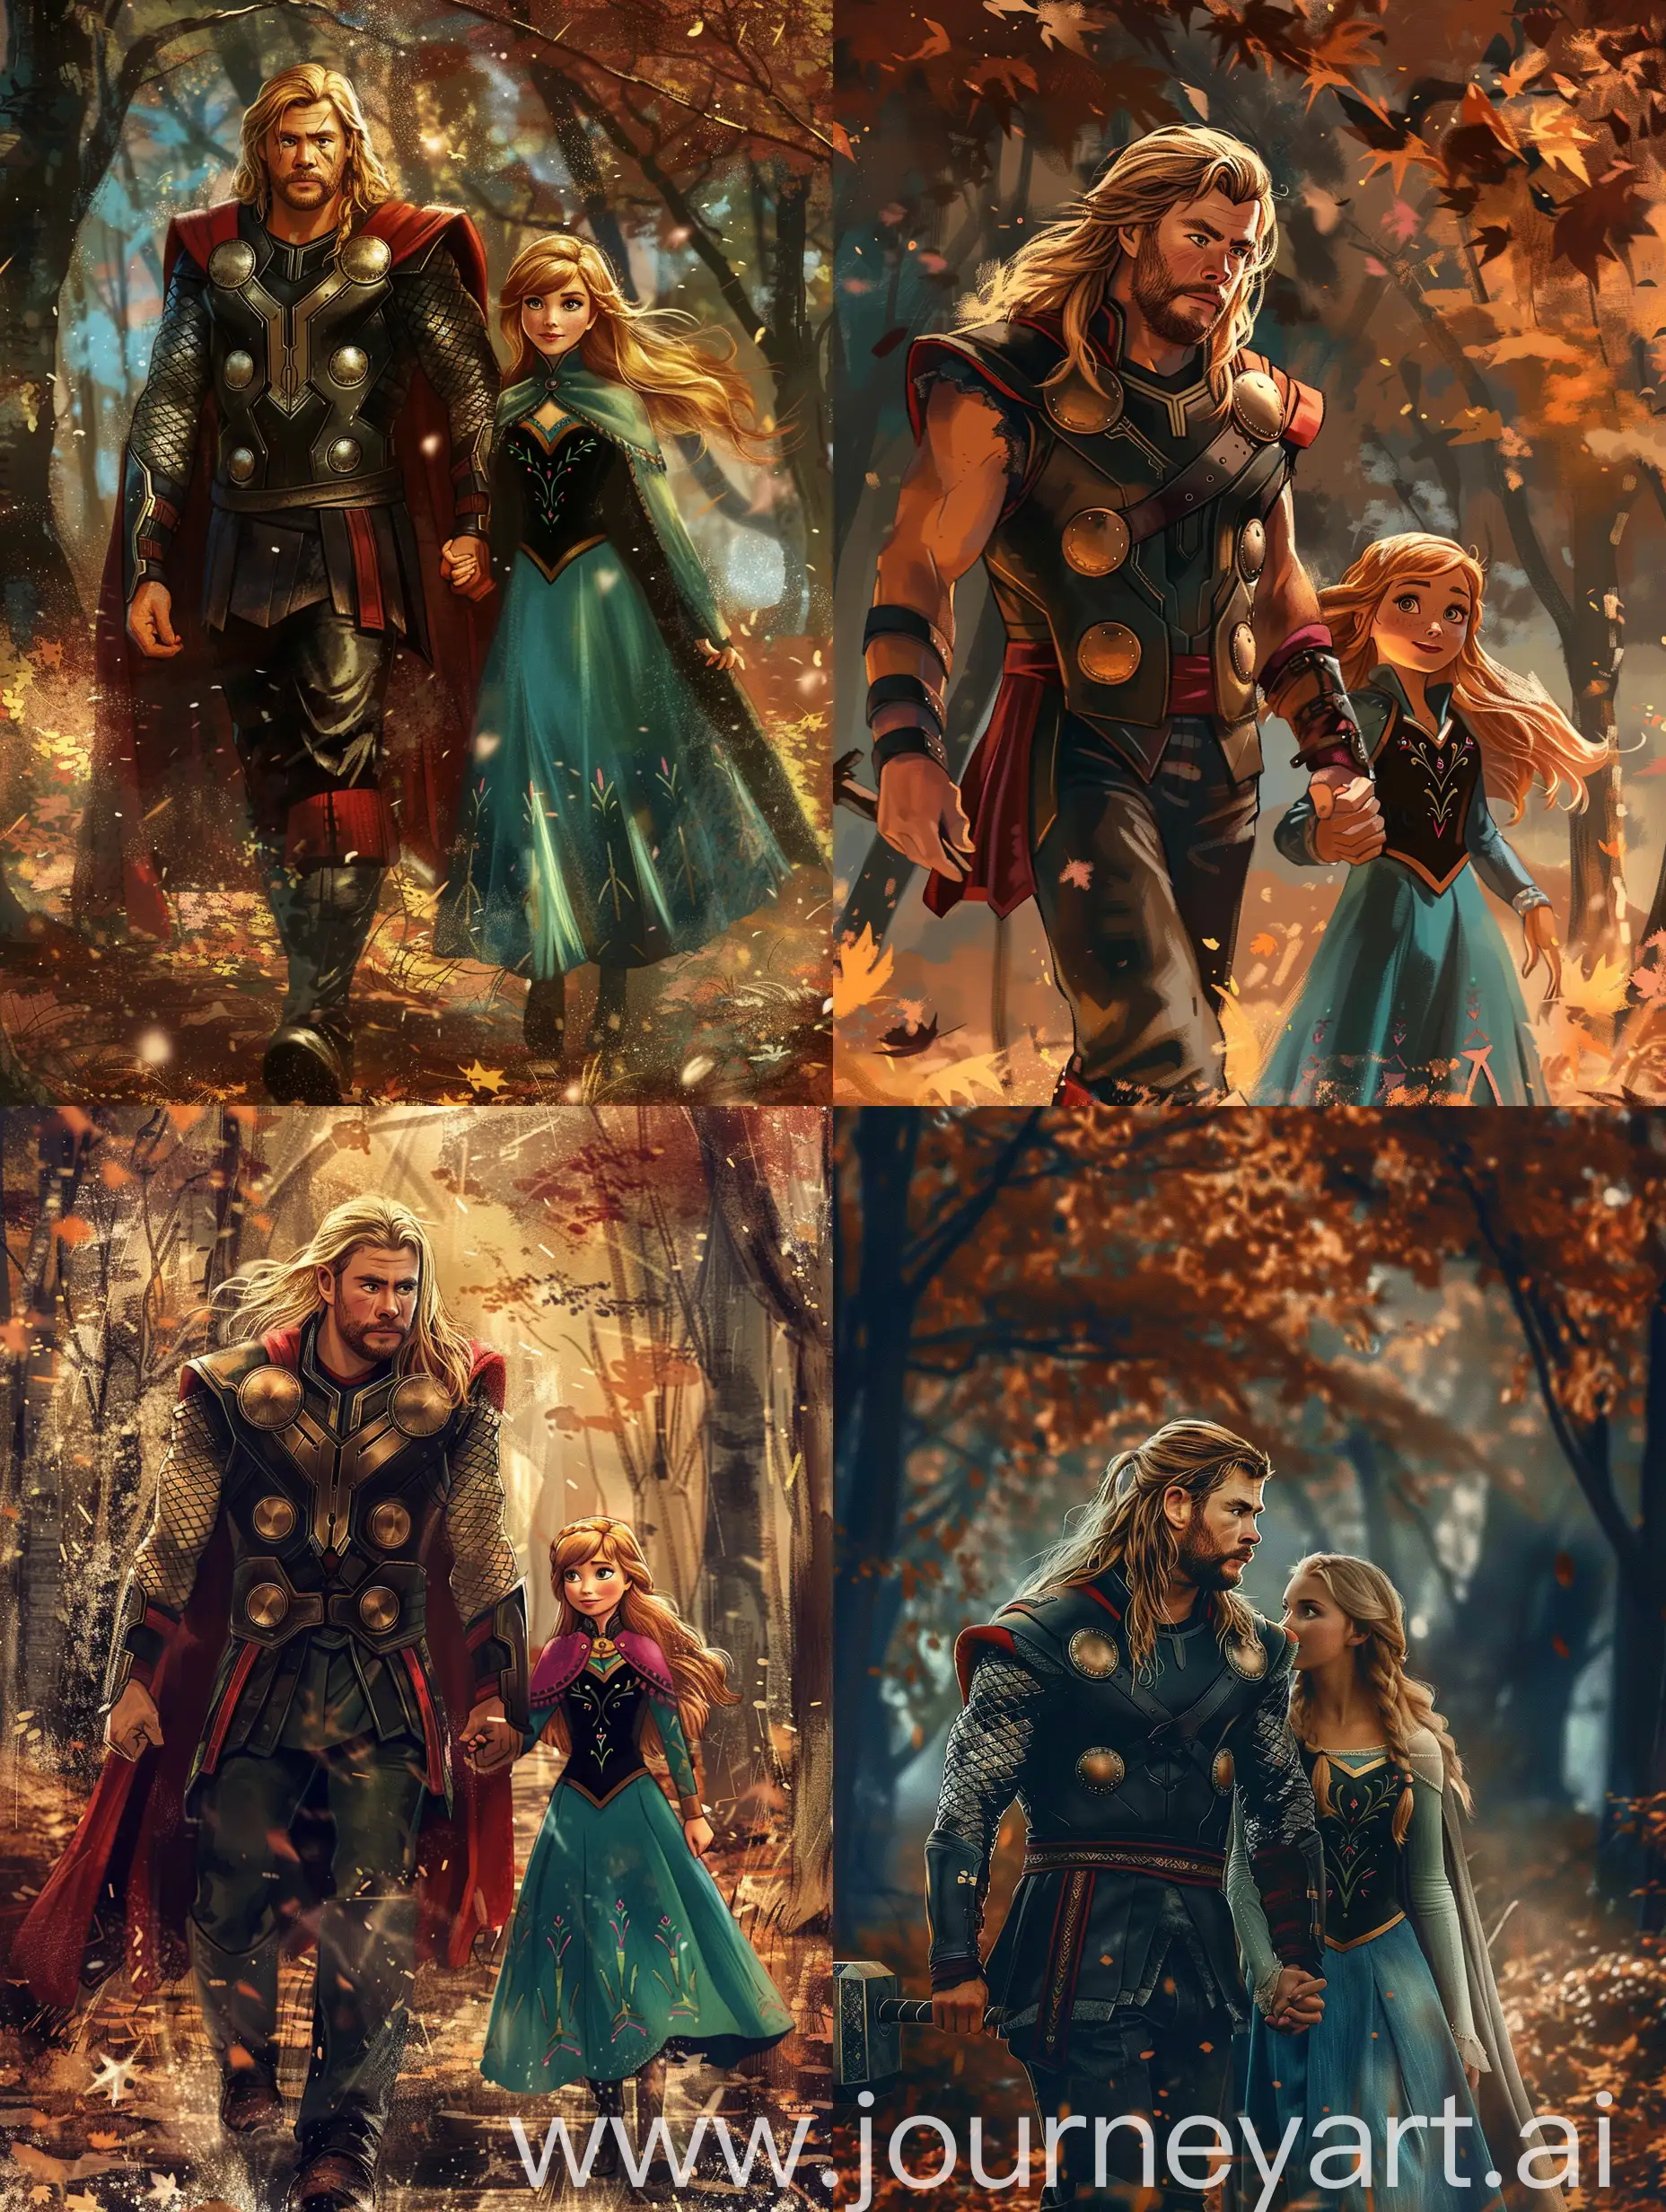 Thor-and-Anna-from-Frozen-Stroll-Through-Enchanted-Autumn-Woods-at-Night